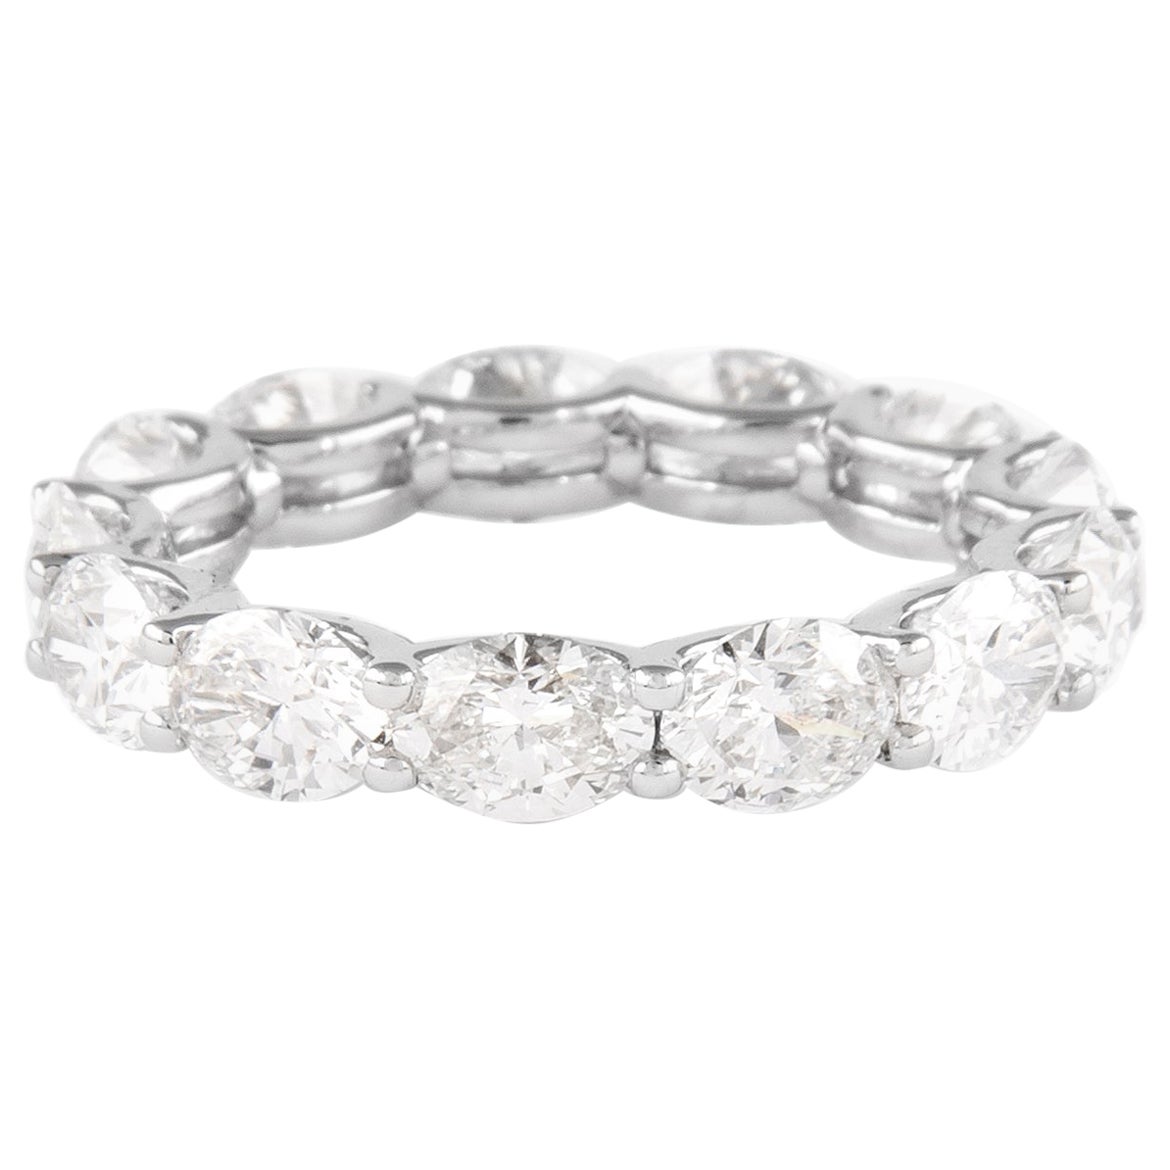 Alexander 5.39 Ct Oval Cut Diamond East West Half Eternity Band 18k White Gold For Sale